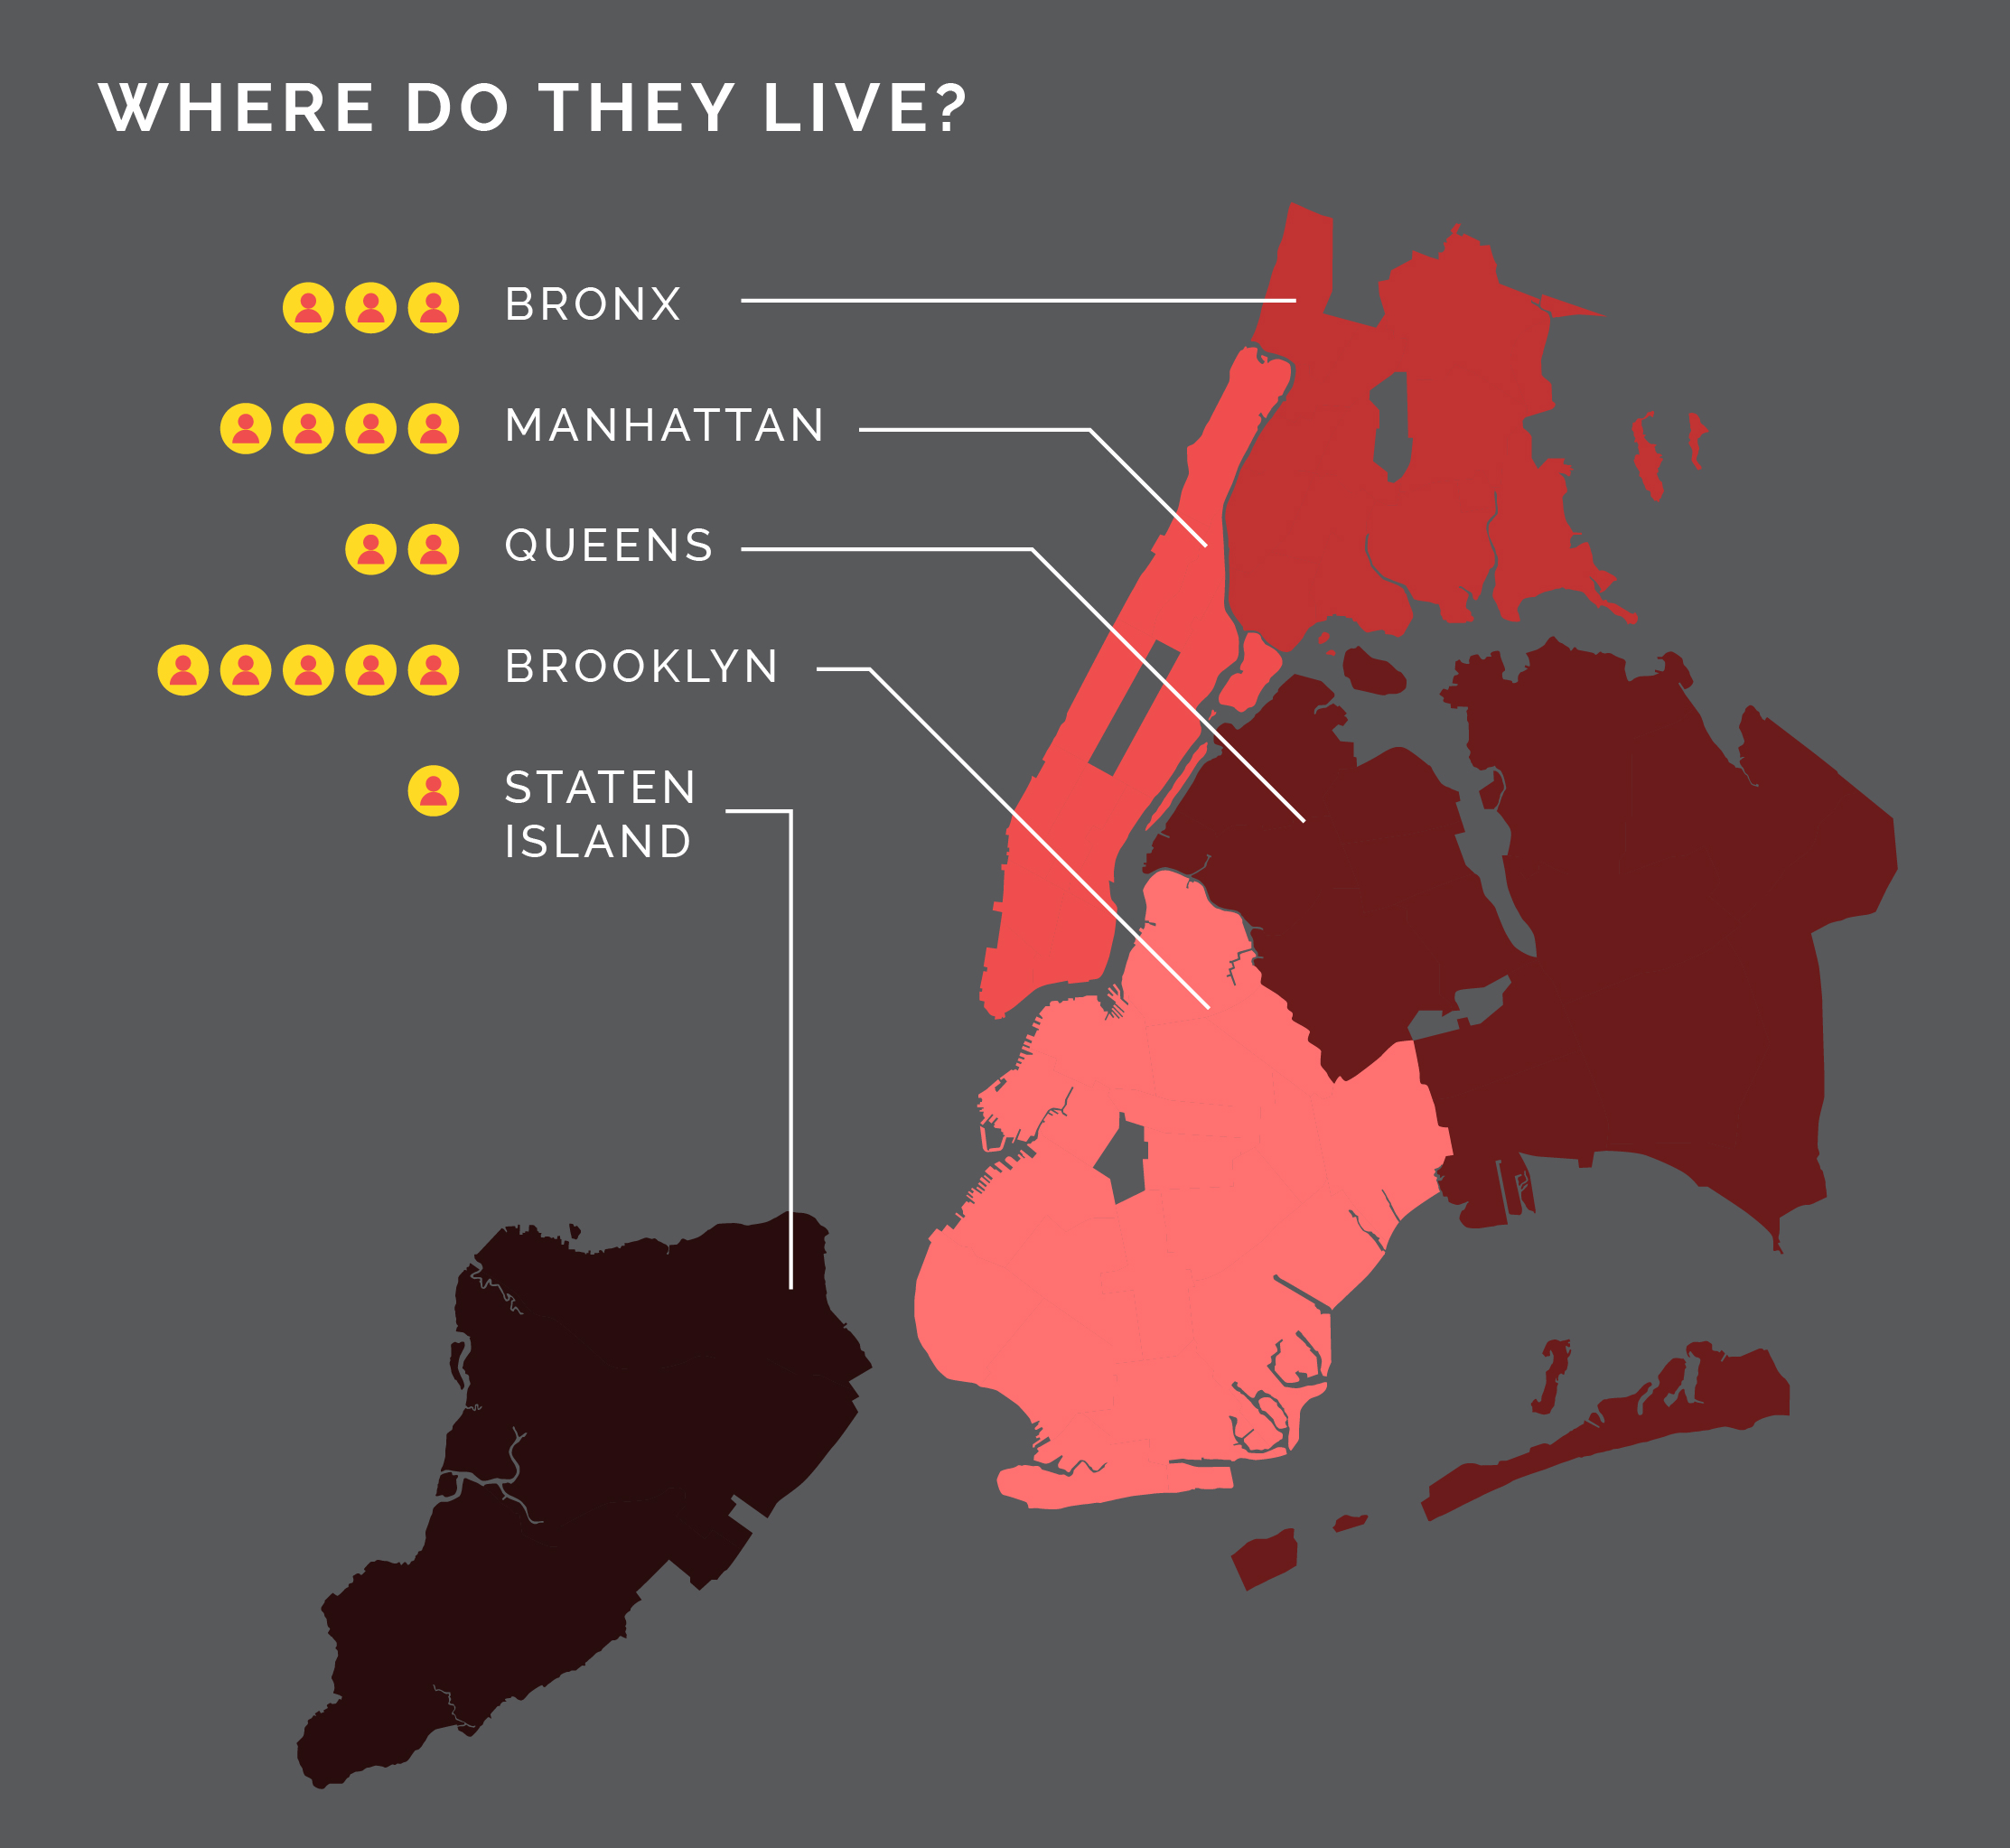 data visualization for where people live.